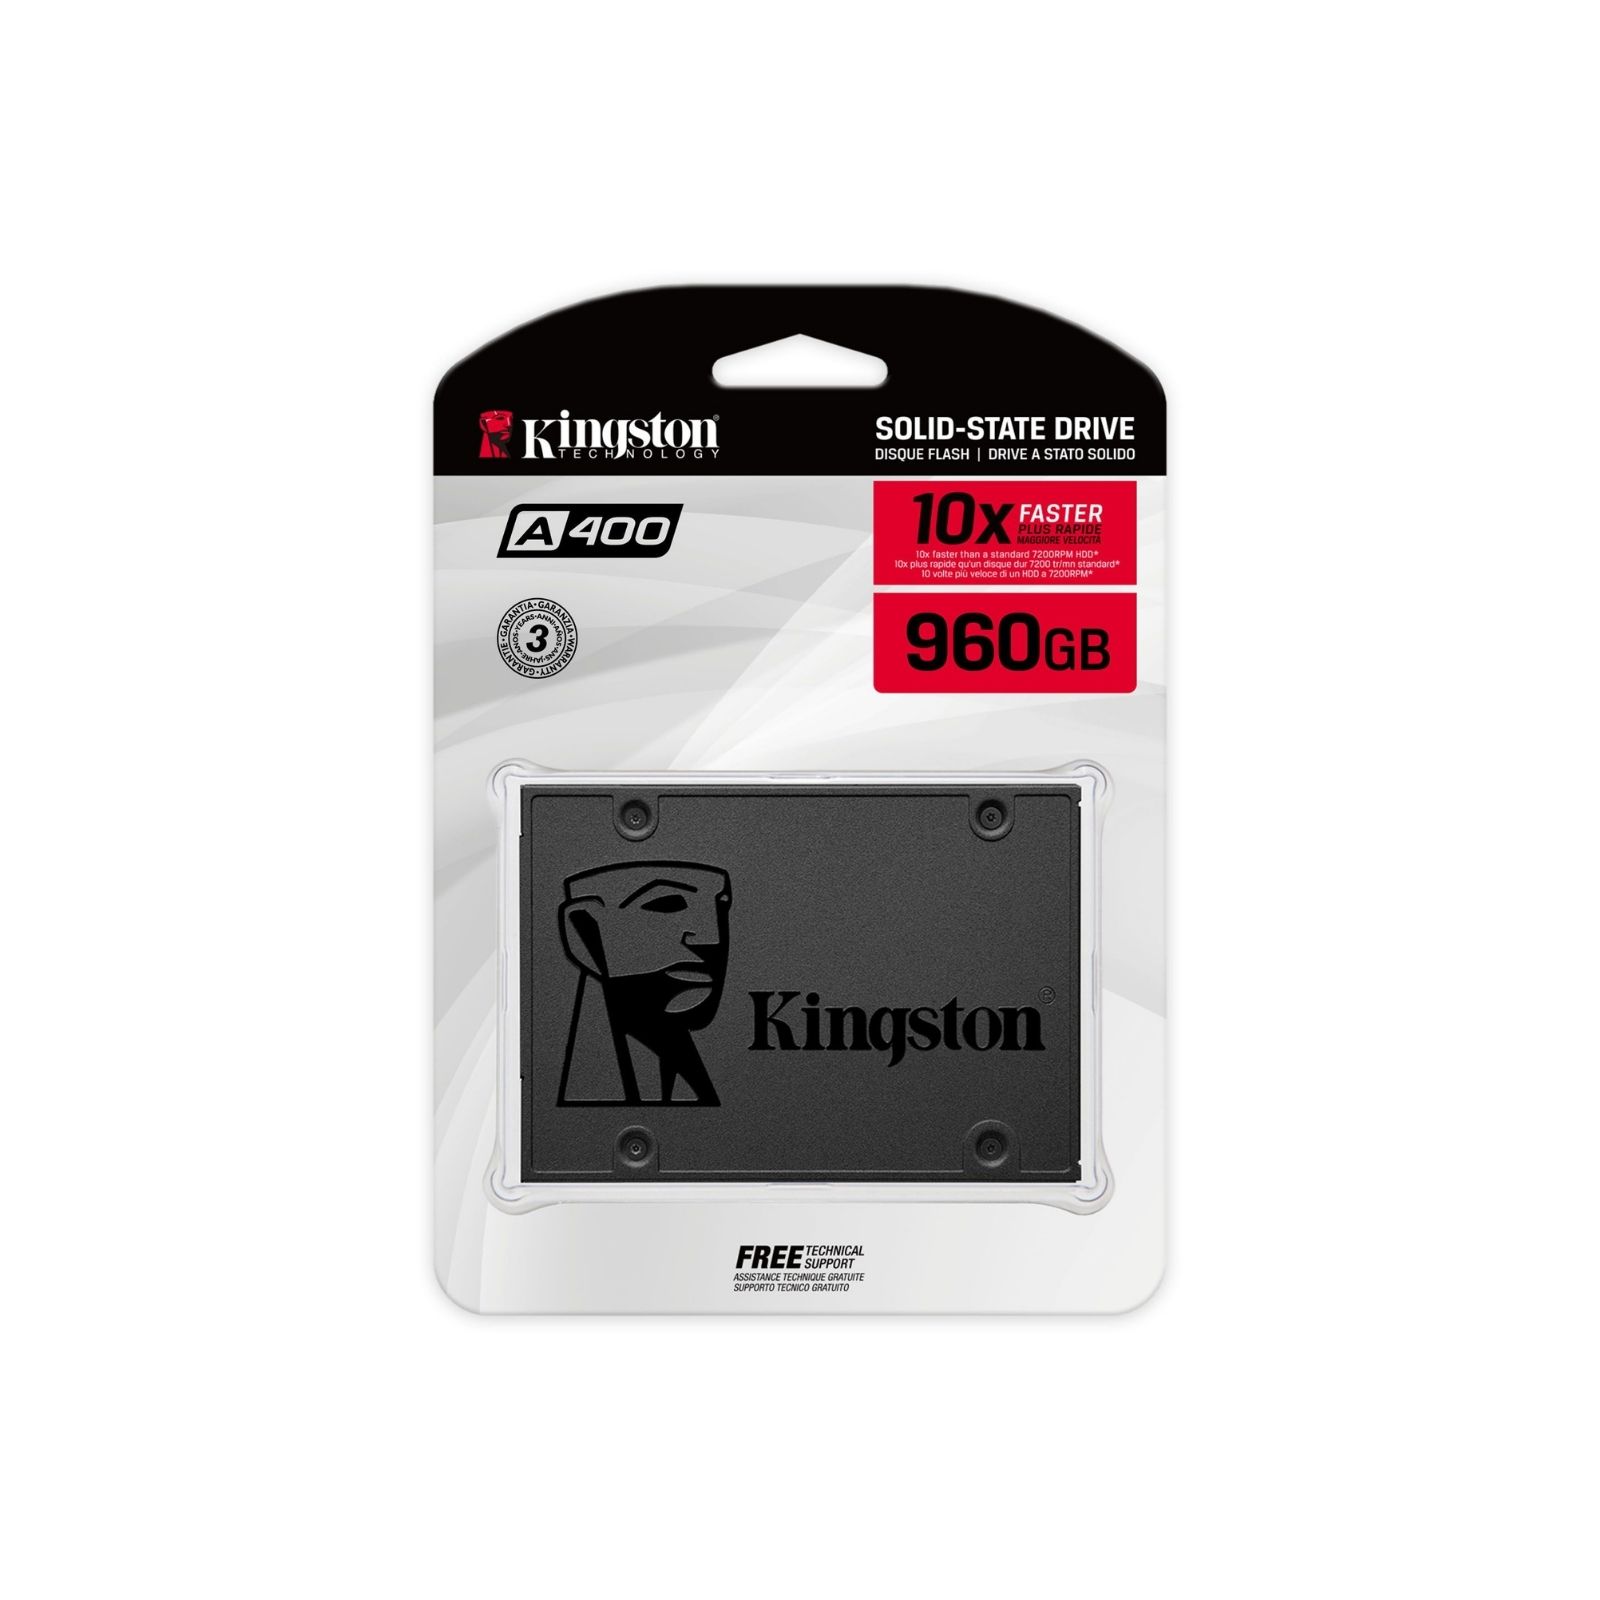 Kingston Sa400s37/960g A400 Ssd Tlc Solid-State Drive 2.5″ 960gb Sata6g – Phison's 3111-S11 Single-Core Controller / Dual-Channel With Ldpc ( Low-Density Parity Check ) Compressible Data (Atto) Read/Write : 500/450mb/Sec 1 Millions Mtbf W